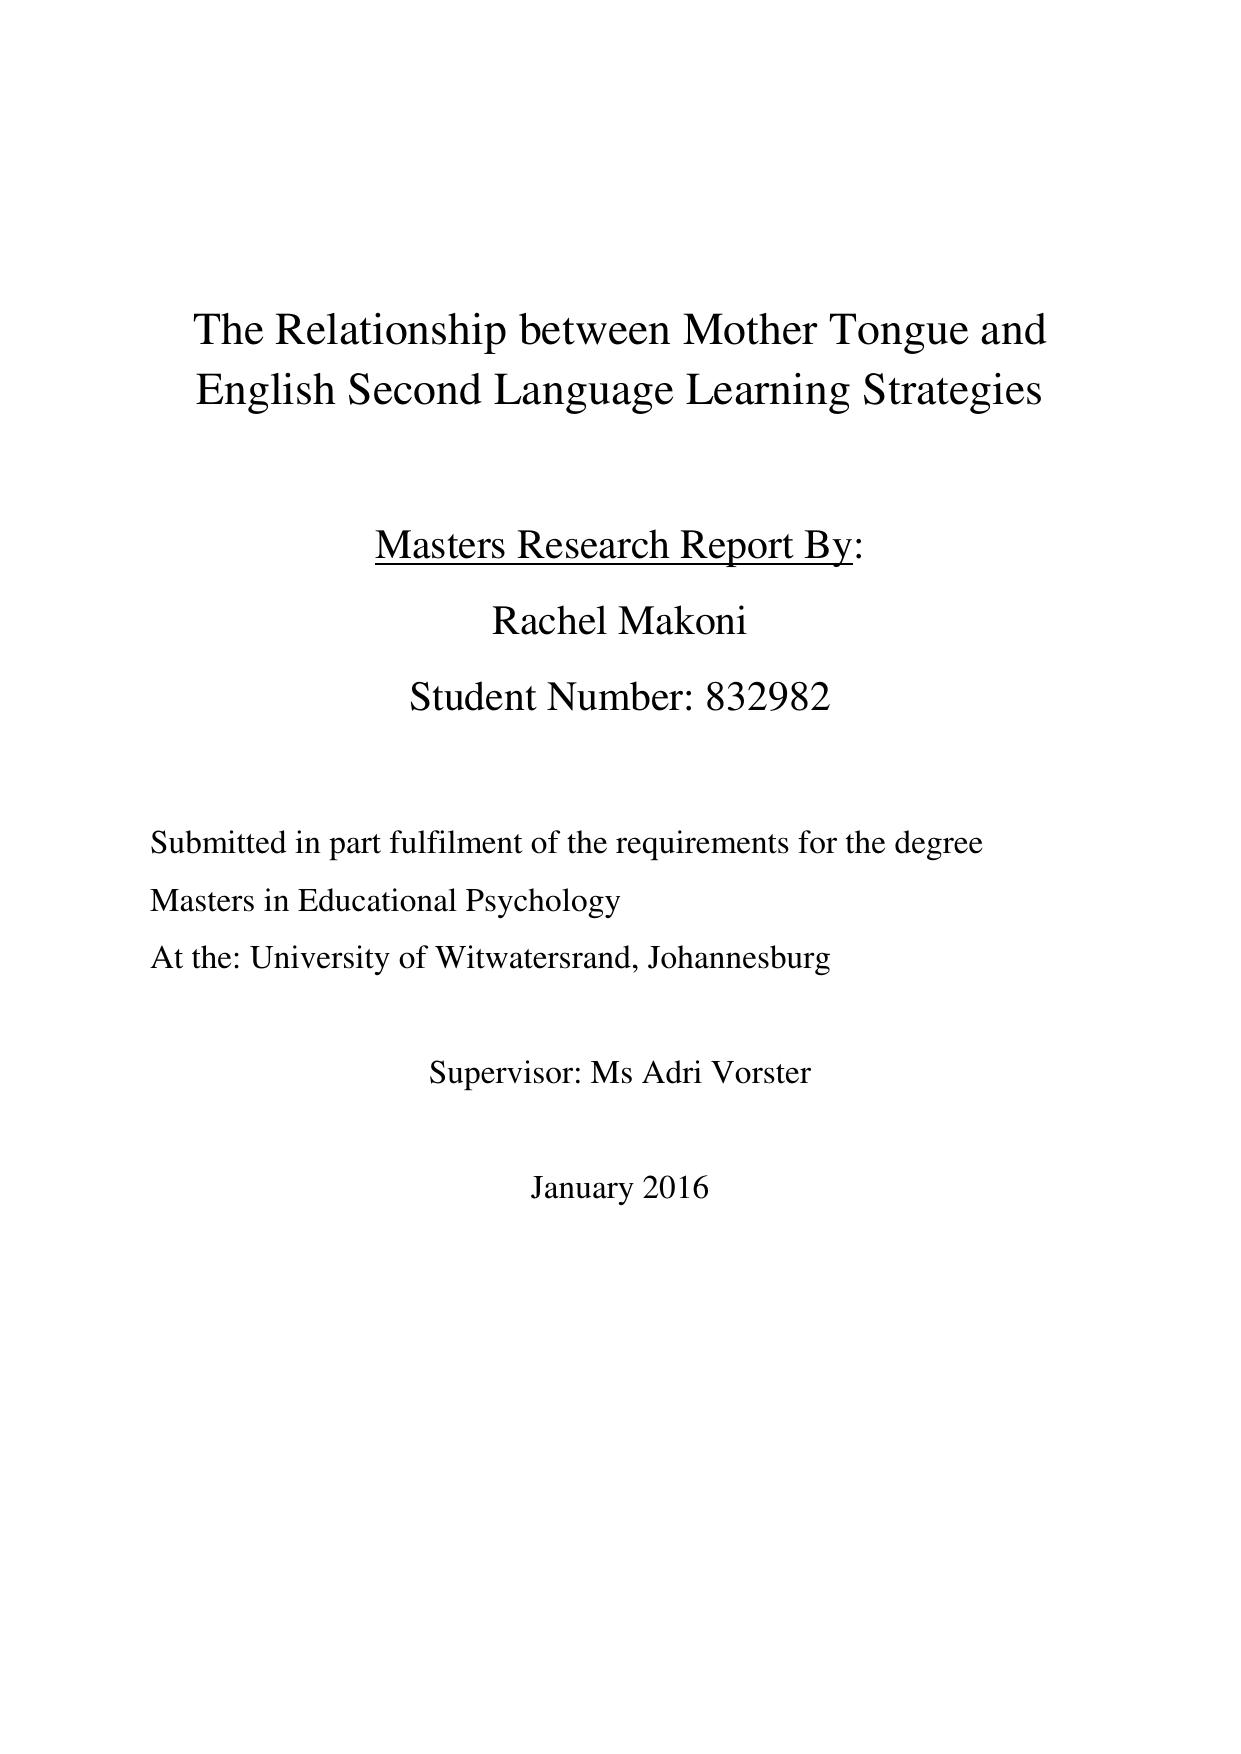 The Relationship between Mother Tongue 2016.pdf